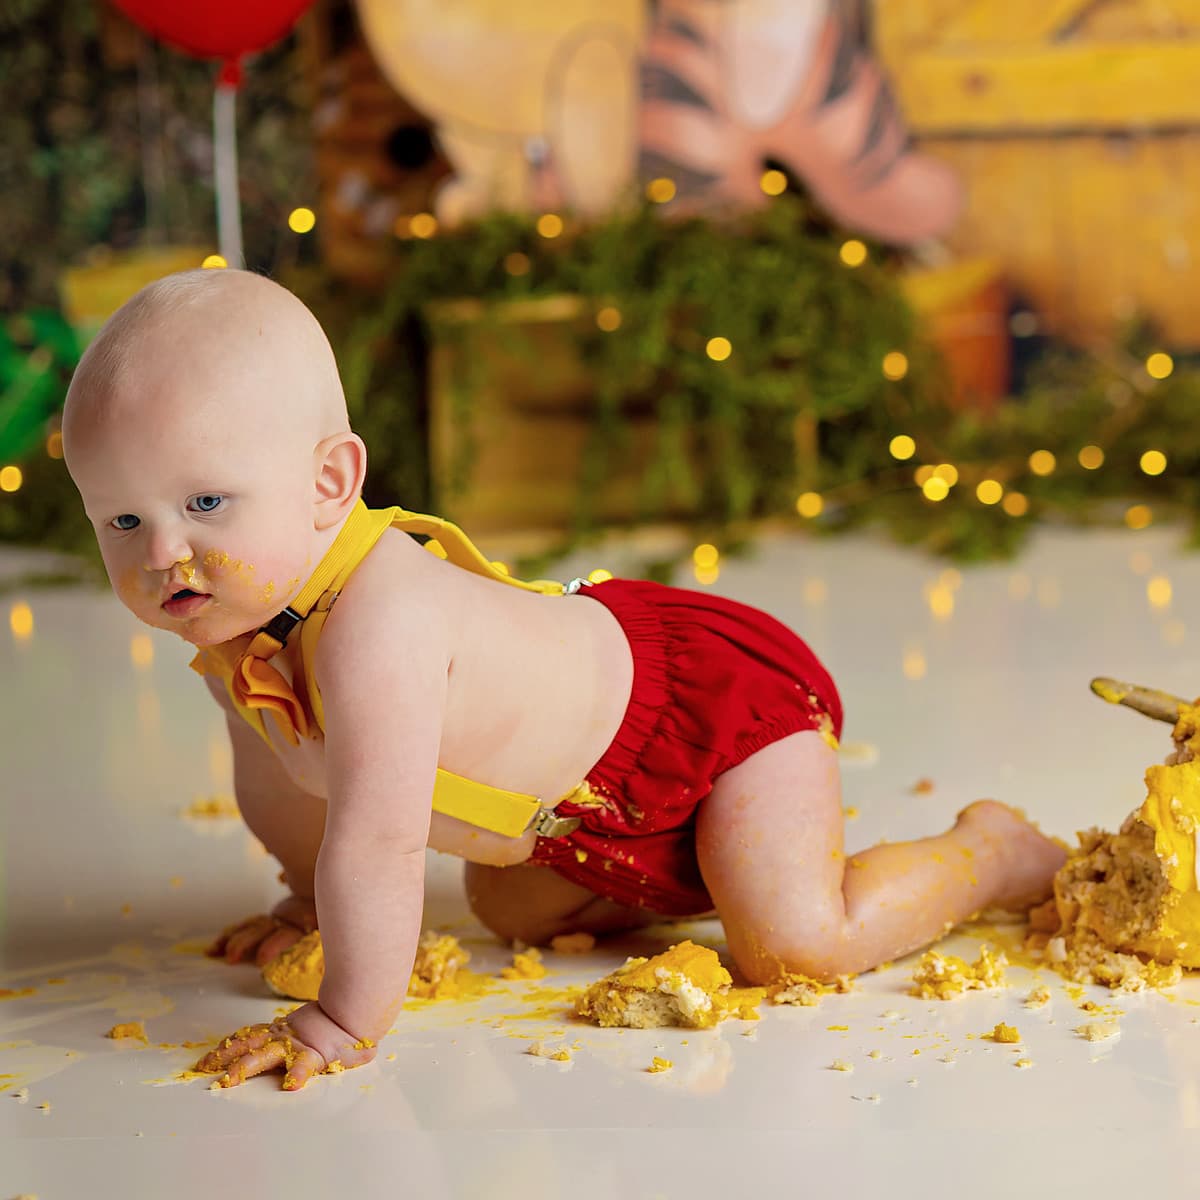 Winnie the Pooh Cake Smash. A toddler is crawling beside a smashed cake